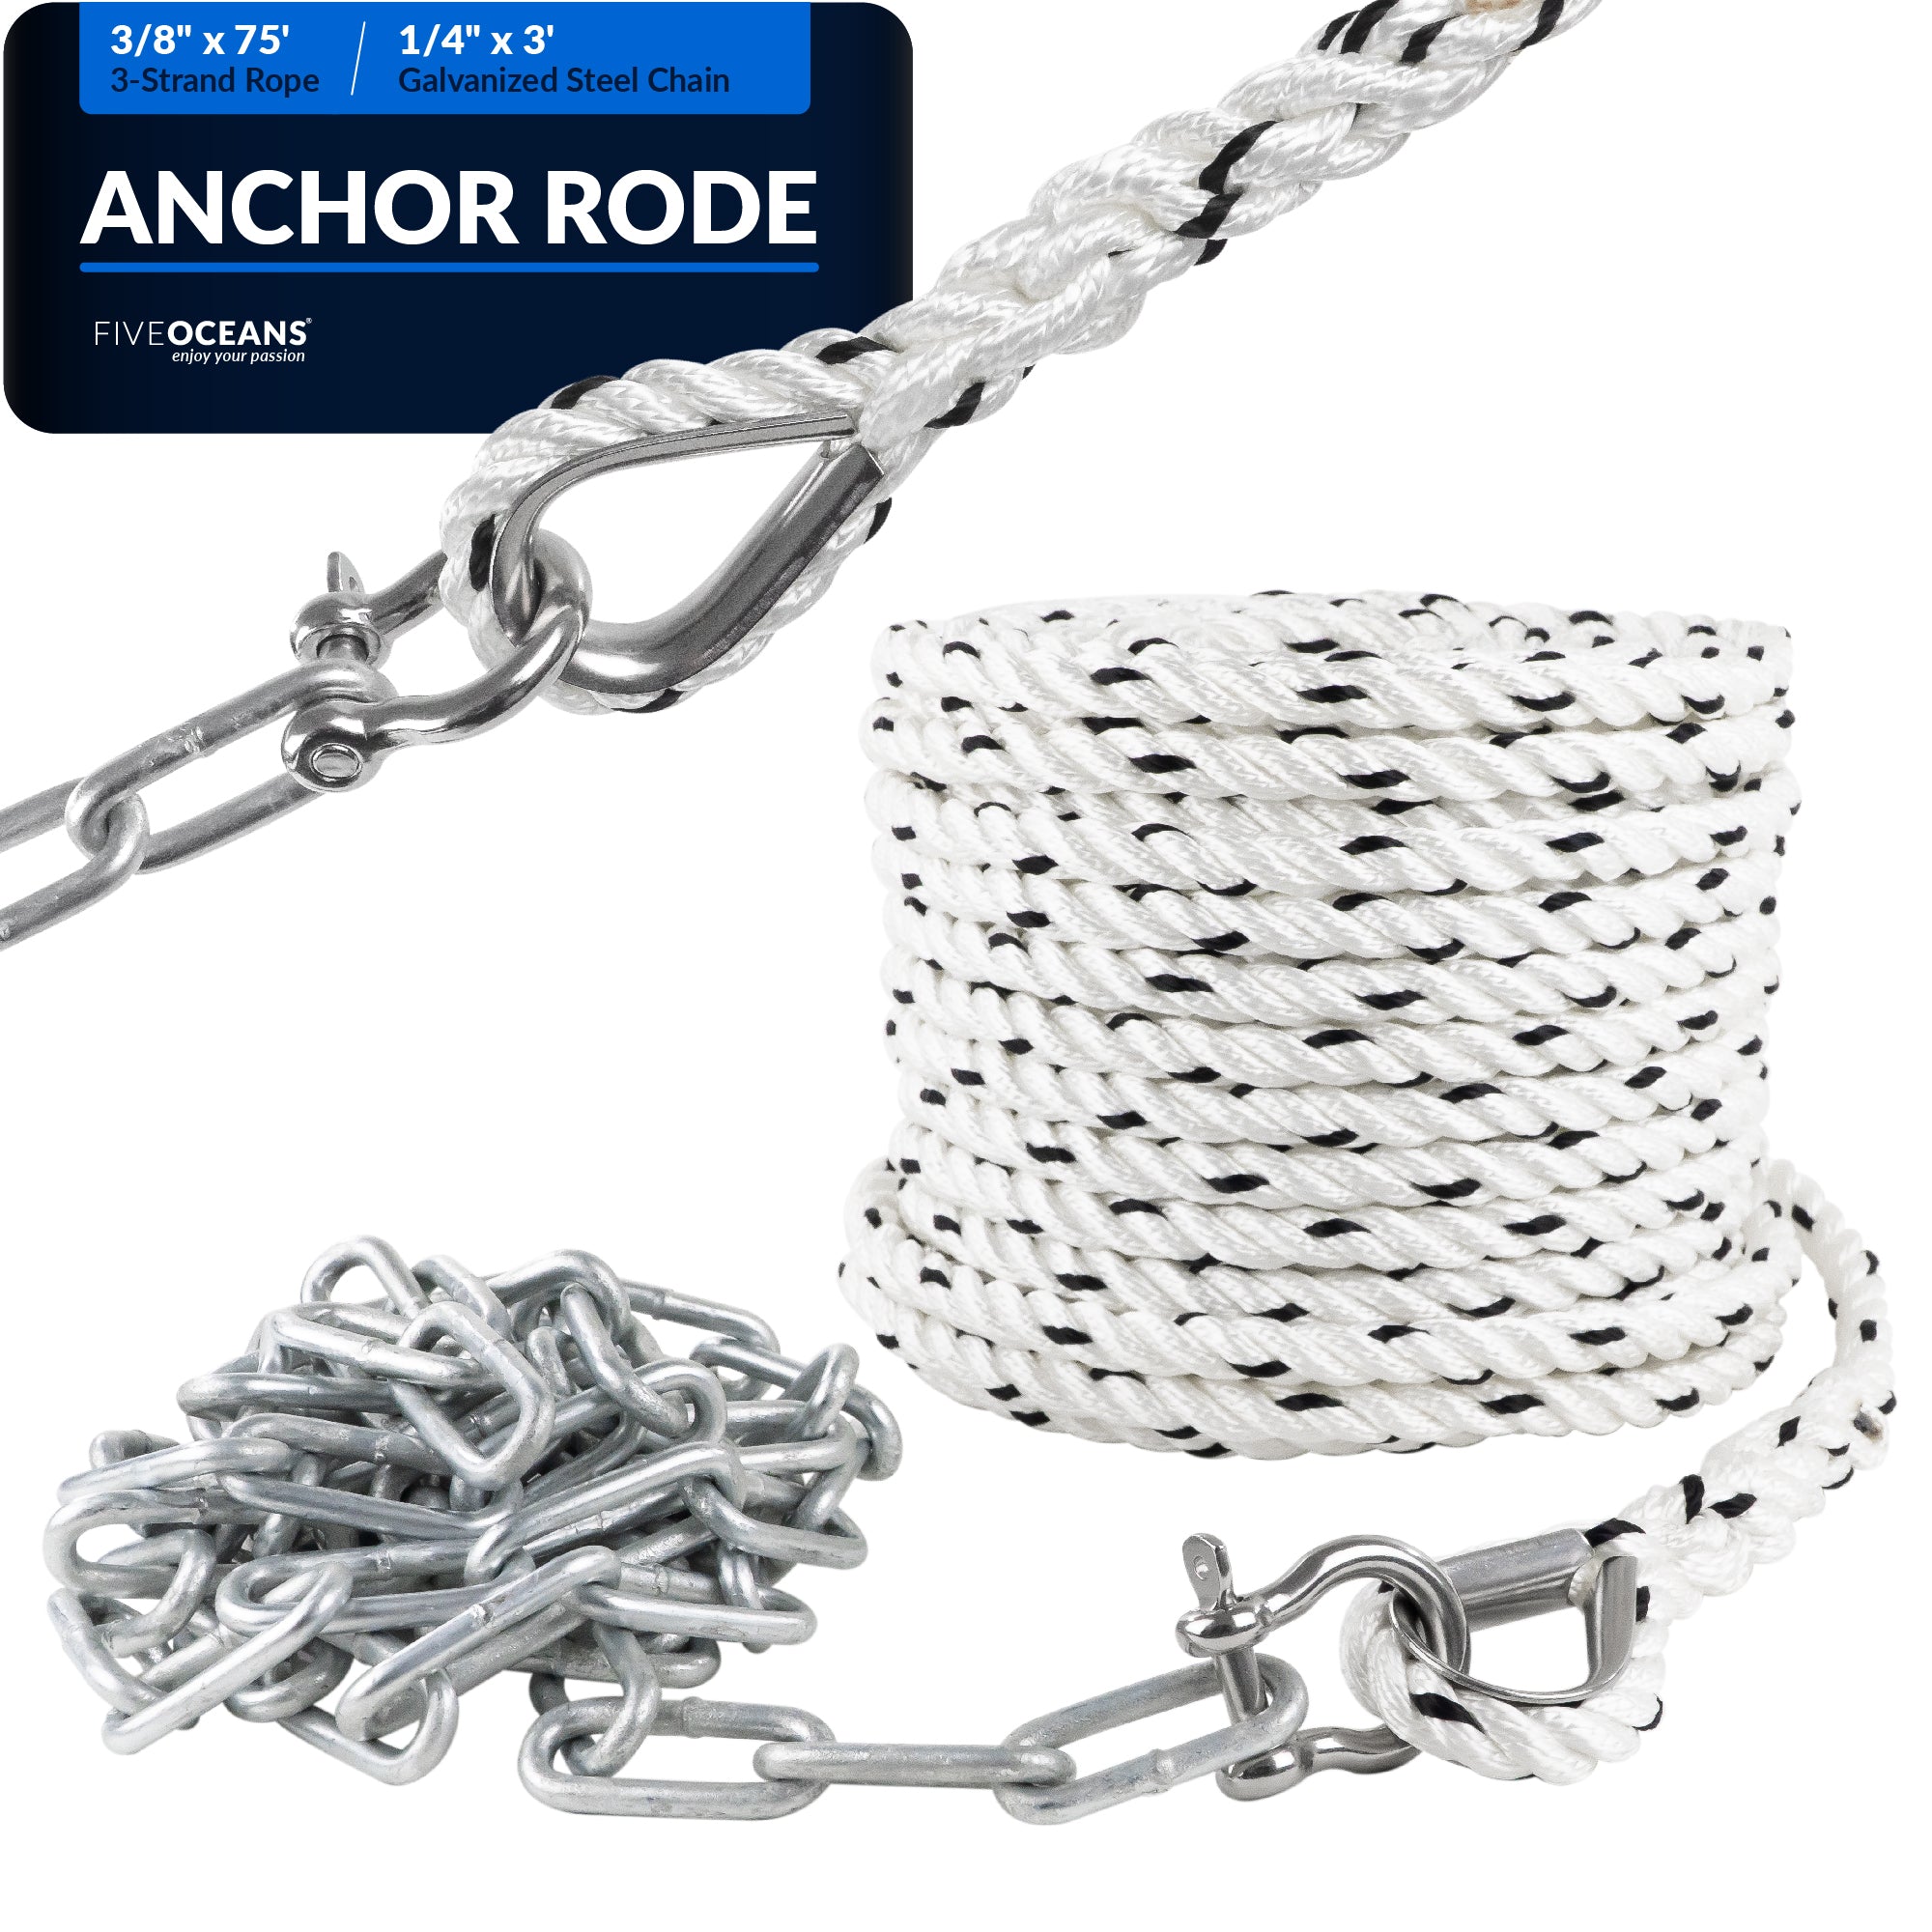 Anchor Rode, 3/8" x 75' Nylon 3-Strand Rope, 1/4" x 3' Hot Dipped Galvanized Steel Chain - FO4571